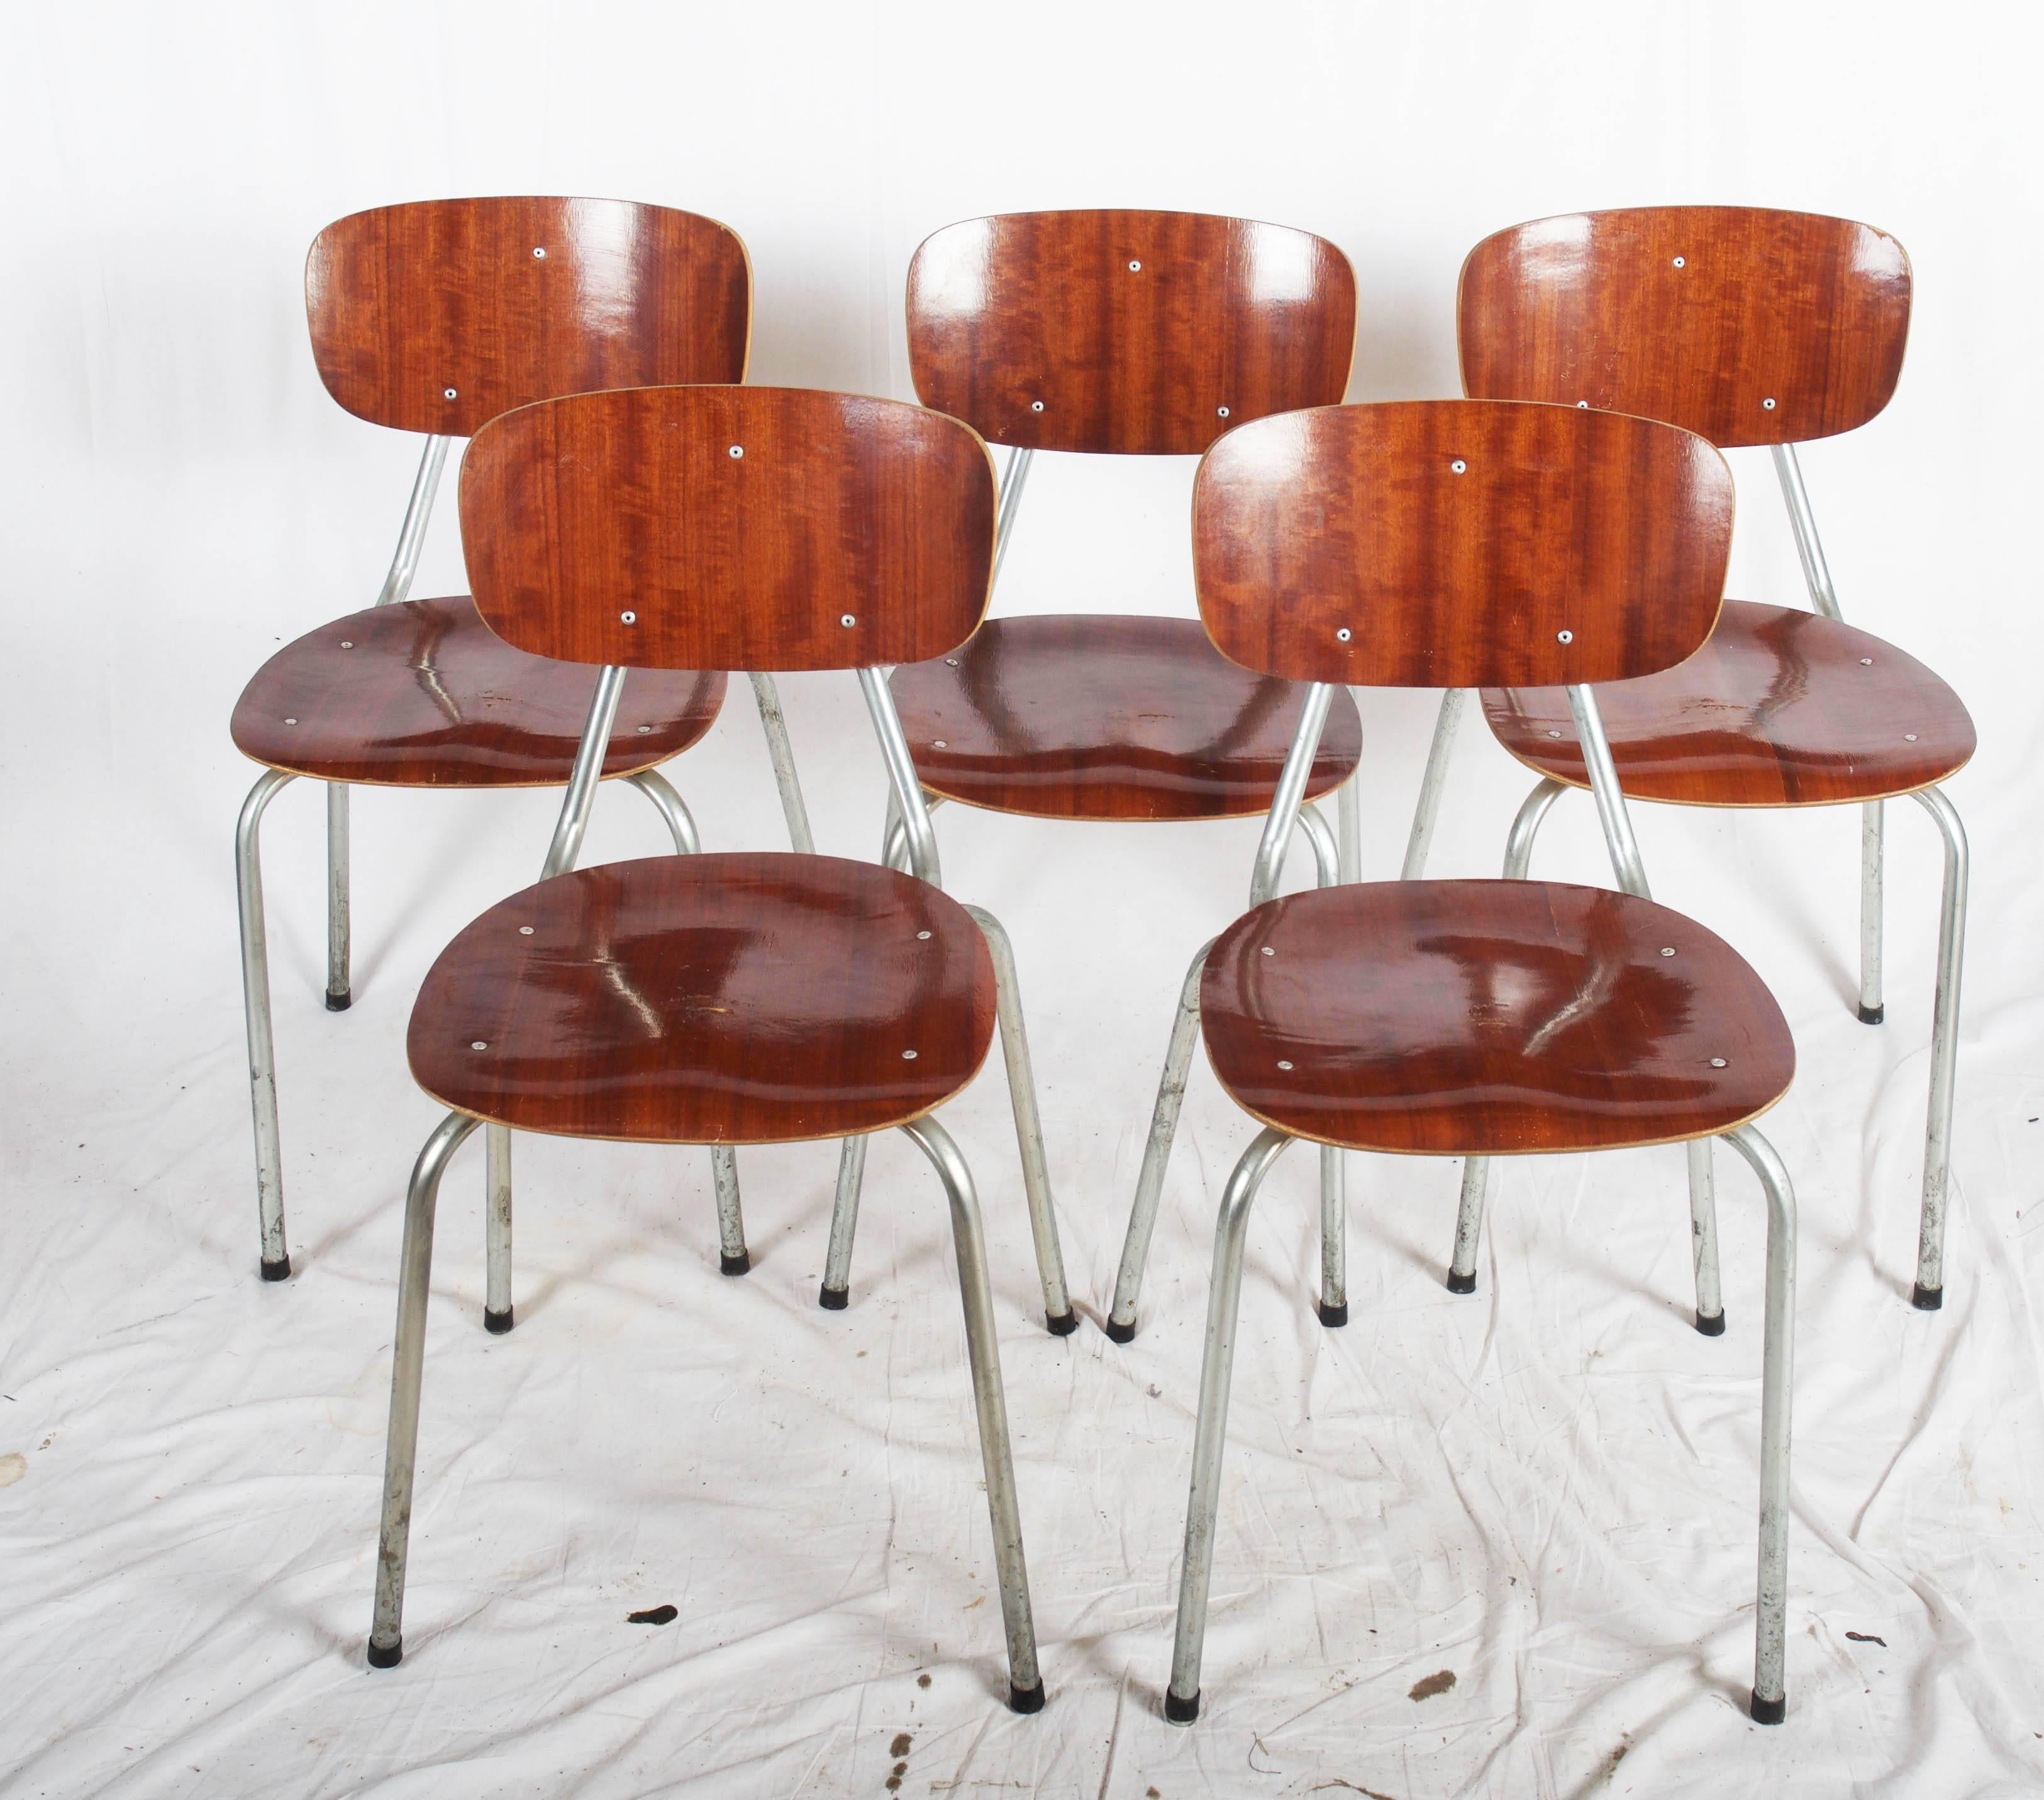 Five chairs, stackable, metal frame, seat and top rail veneered varnished beech. H. 76 Sh. 44 cm. Signs of wear, scratches, veneer chips, staple marks.